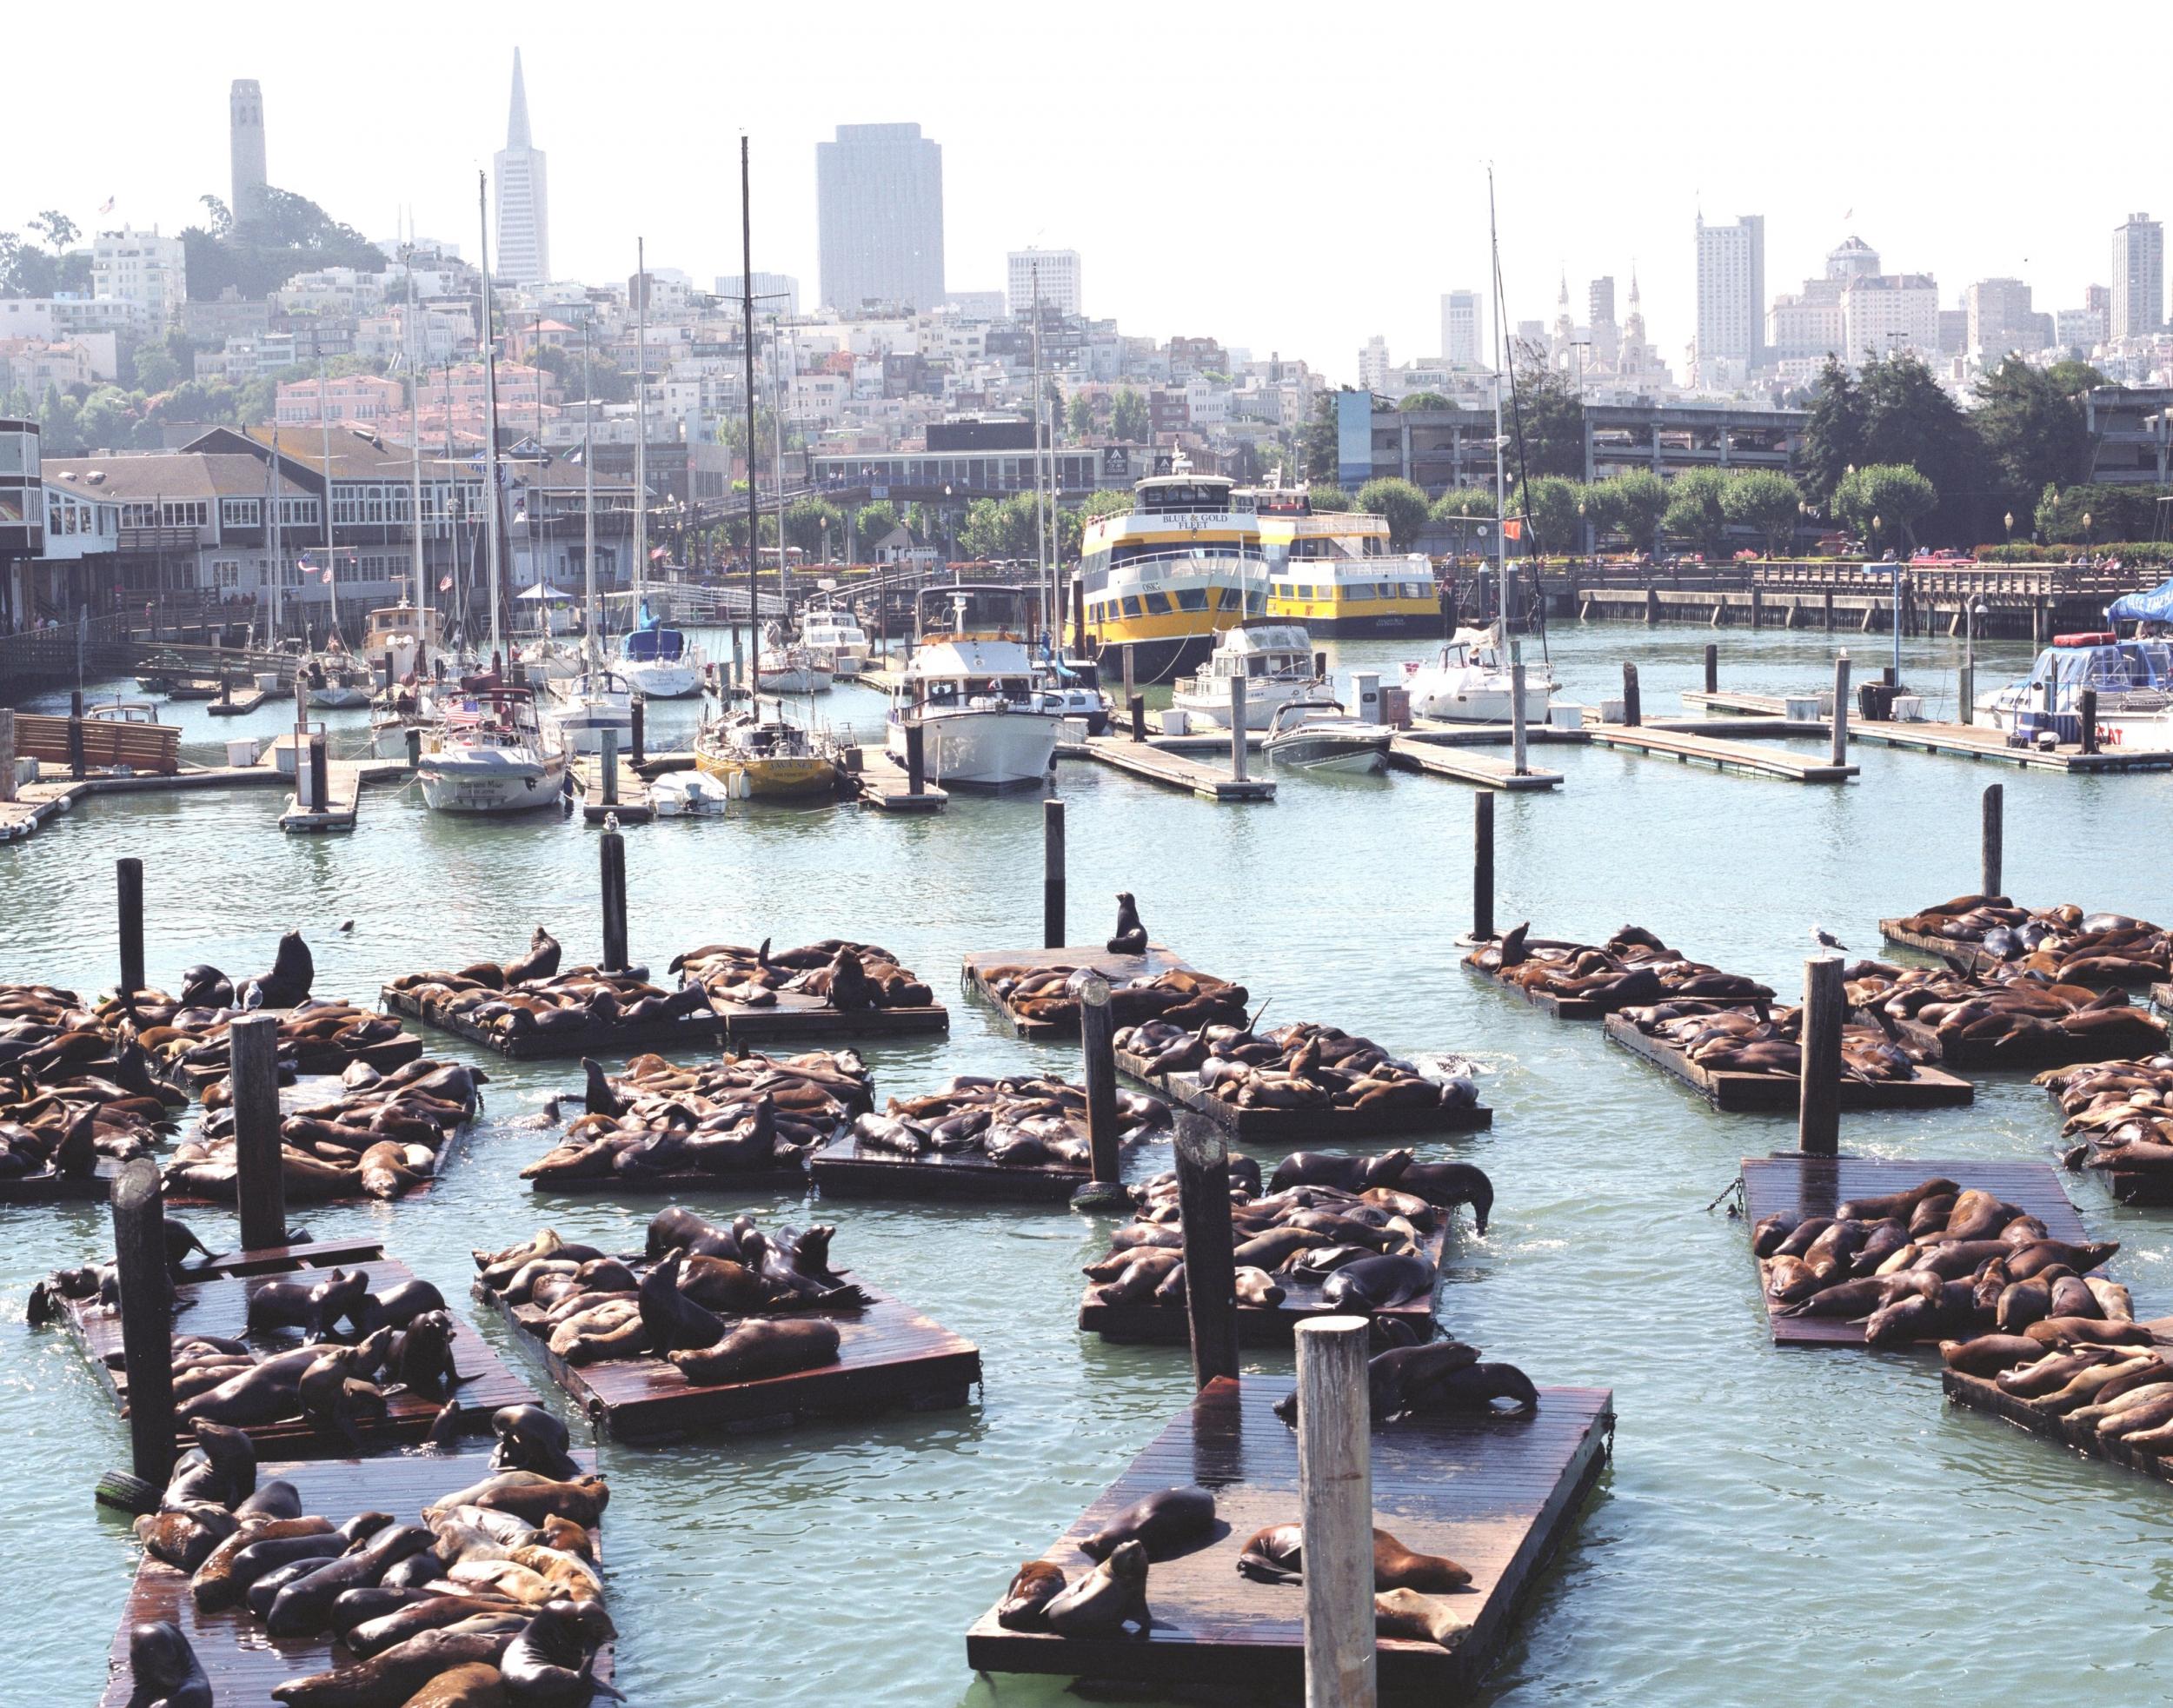 The sea lions of Fisherman’s Wharf arrived in the city 30 years ago